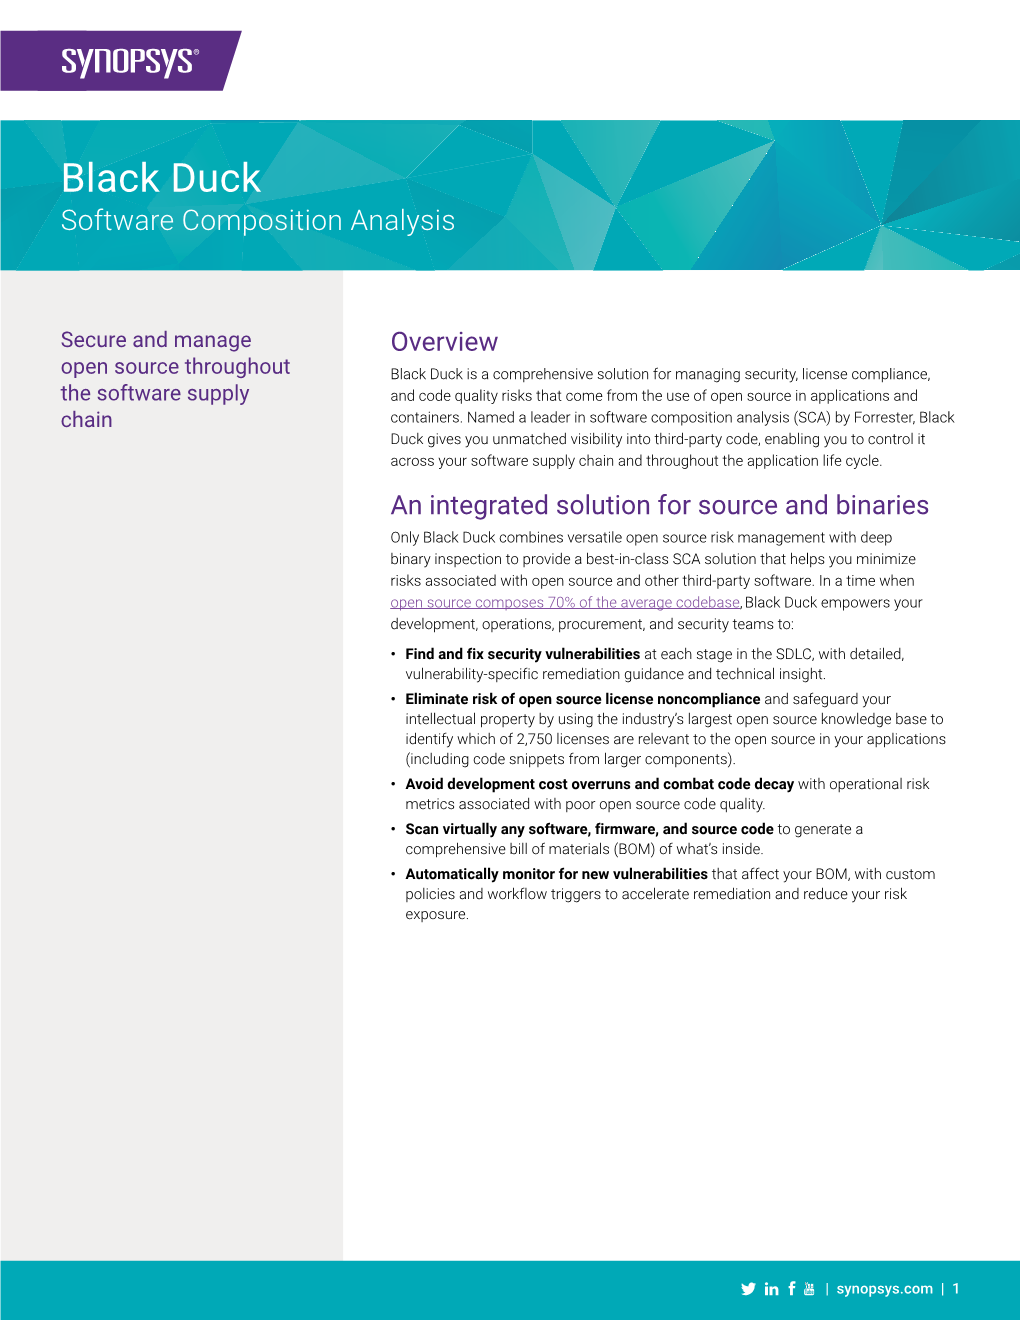 Black Duck Software Composition Analysis